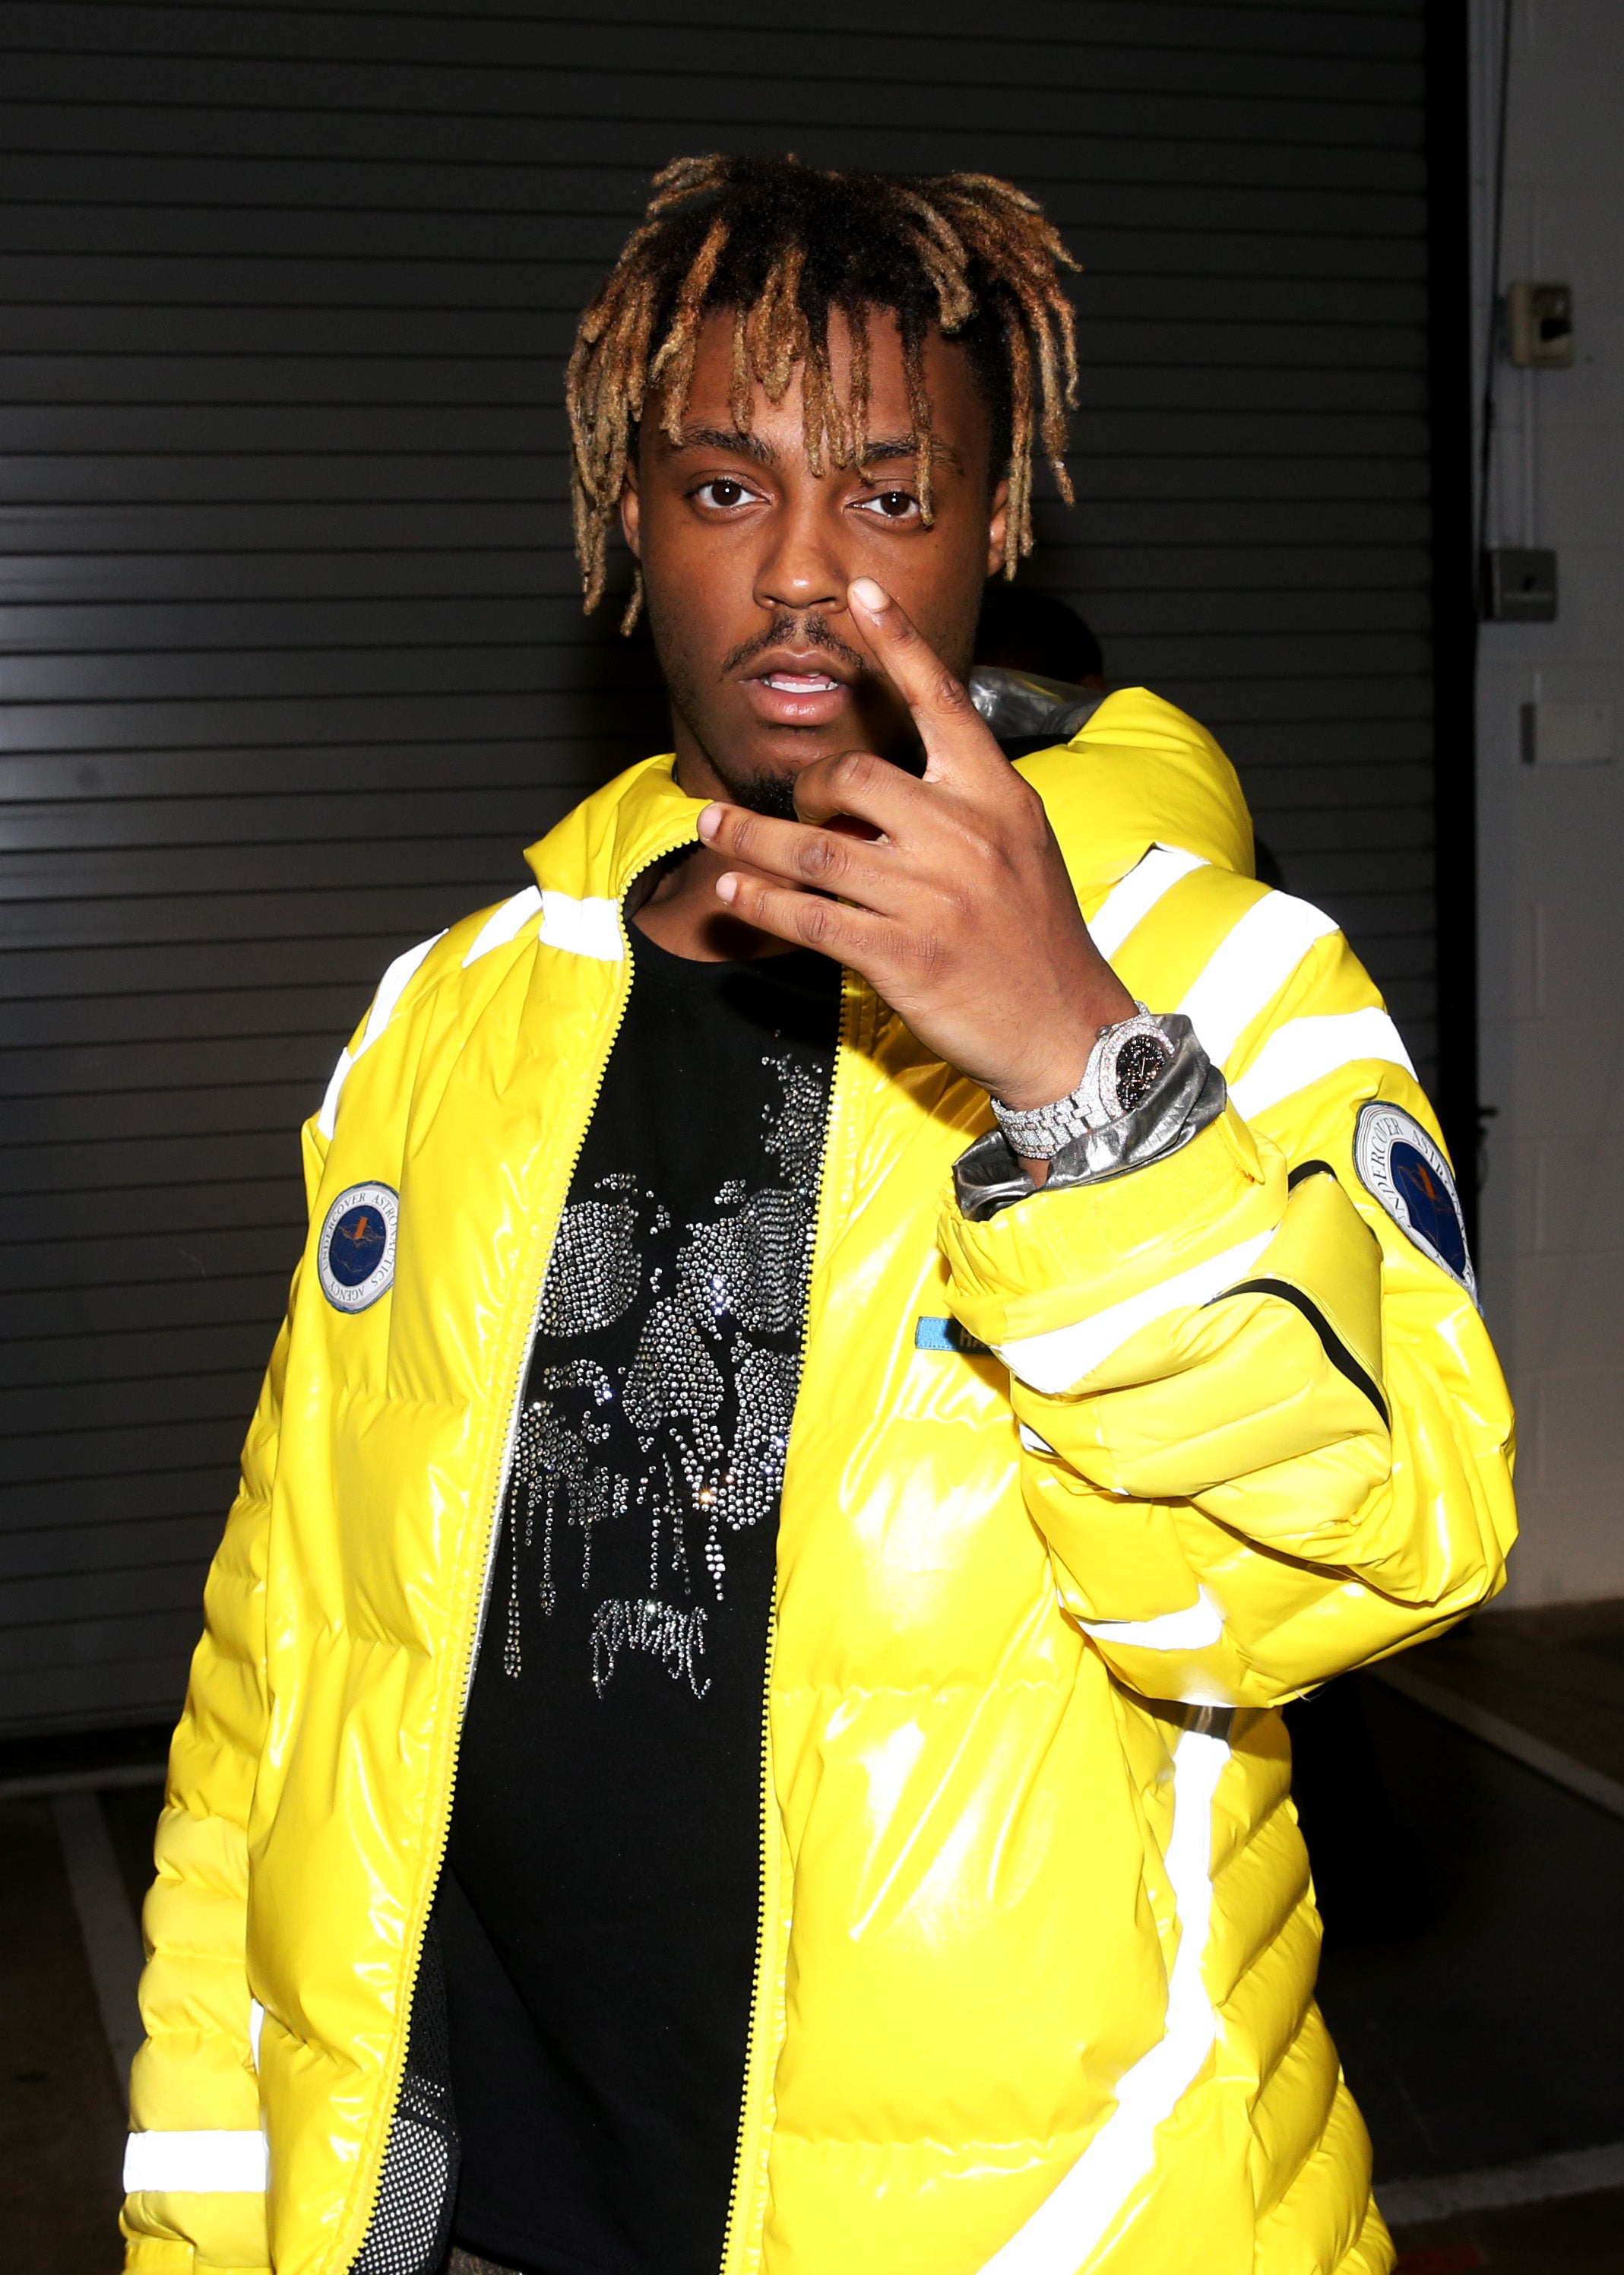 someone know this clothes juice was wearing? : r/JuiceWRLD